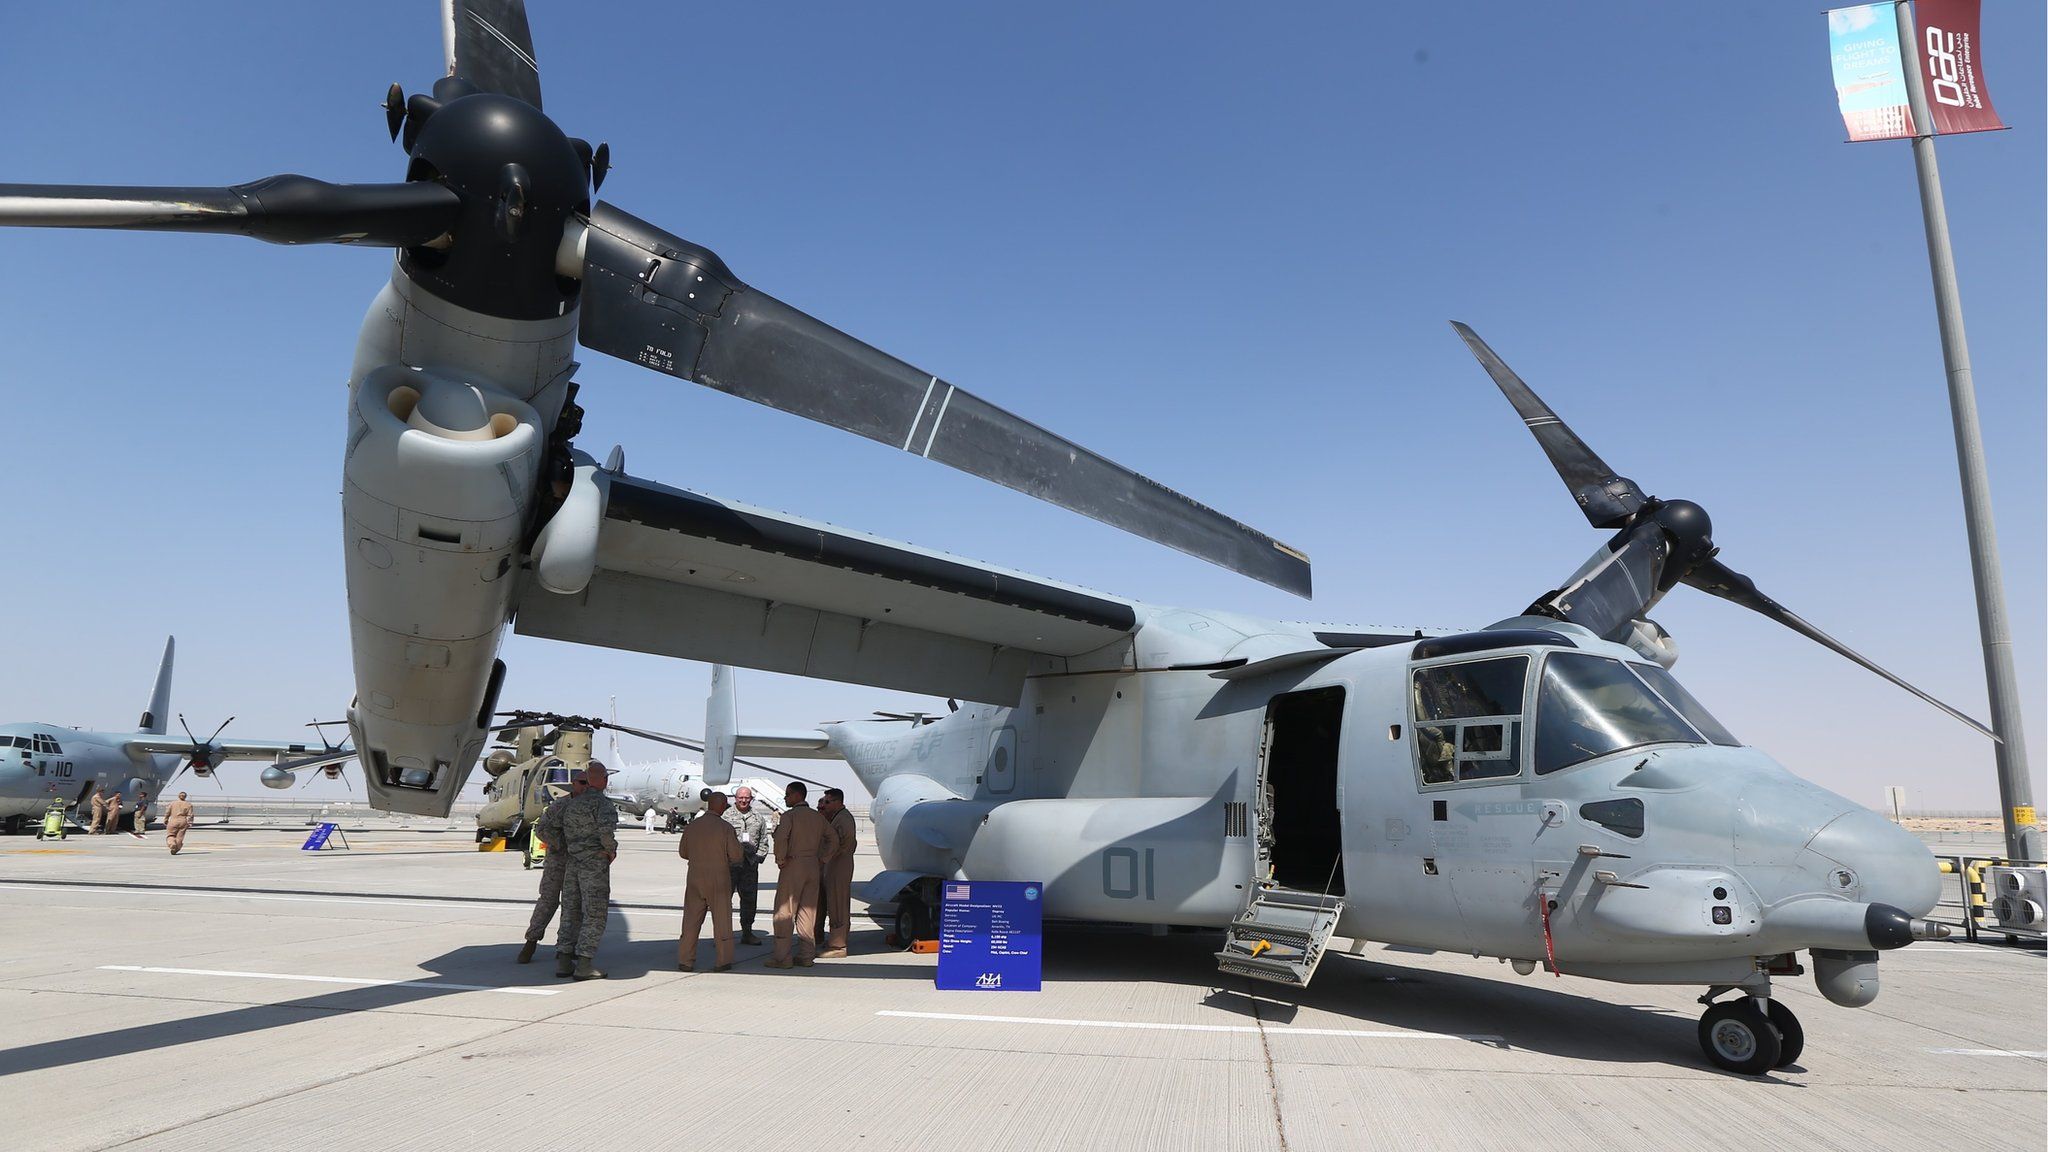 US soldiers stand in the shade of the wing of a Bell Boeing V-22 Osprey, a , tiltrotor military aircraft, at the Dubai Airshow on 8 Nov, 2015